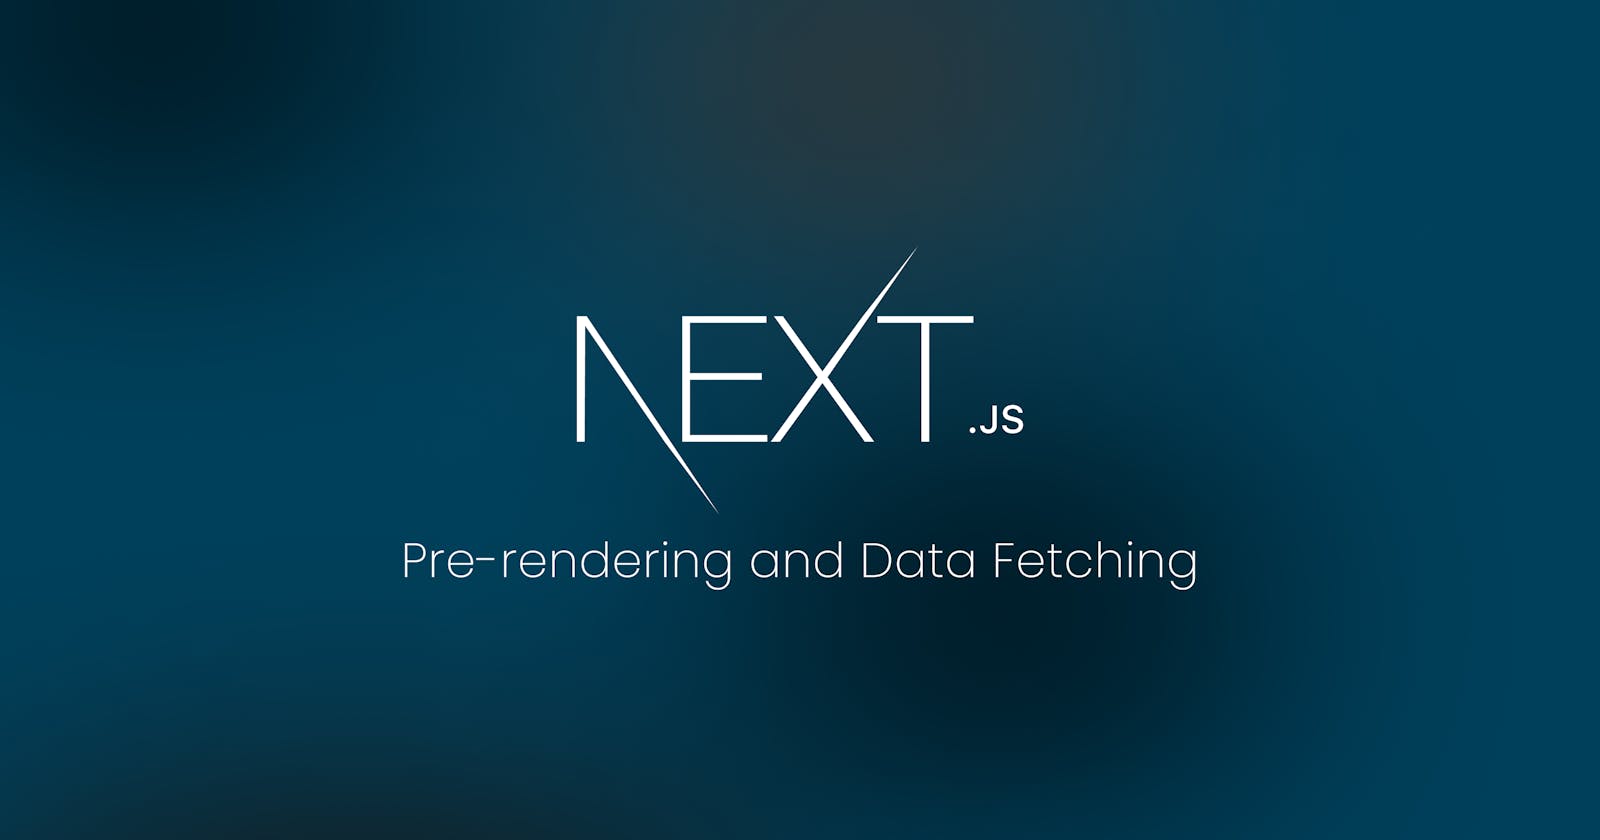 All About Next.js Pre-rendering and Data Fetching via SSR and SSG